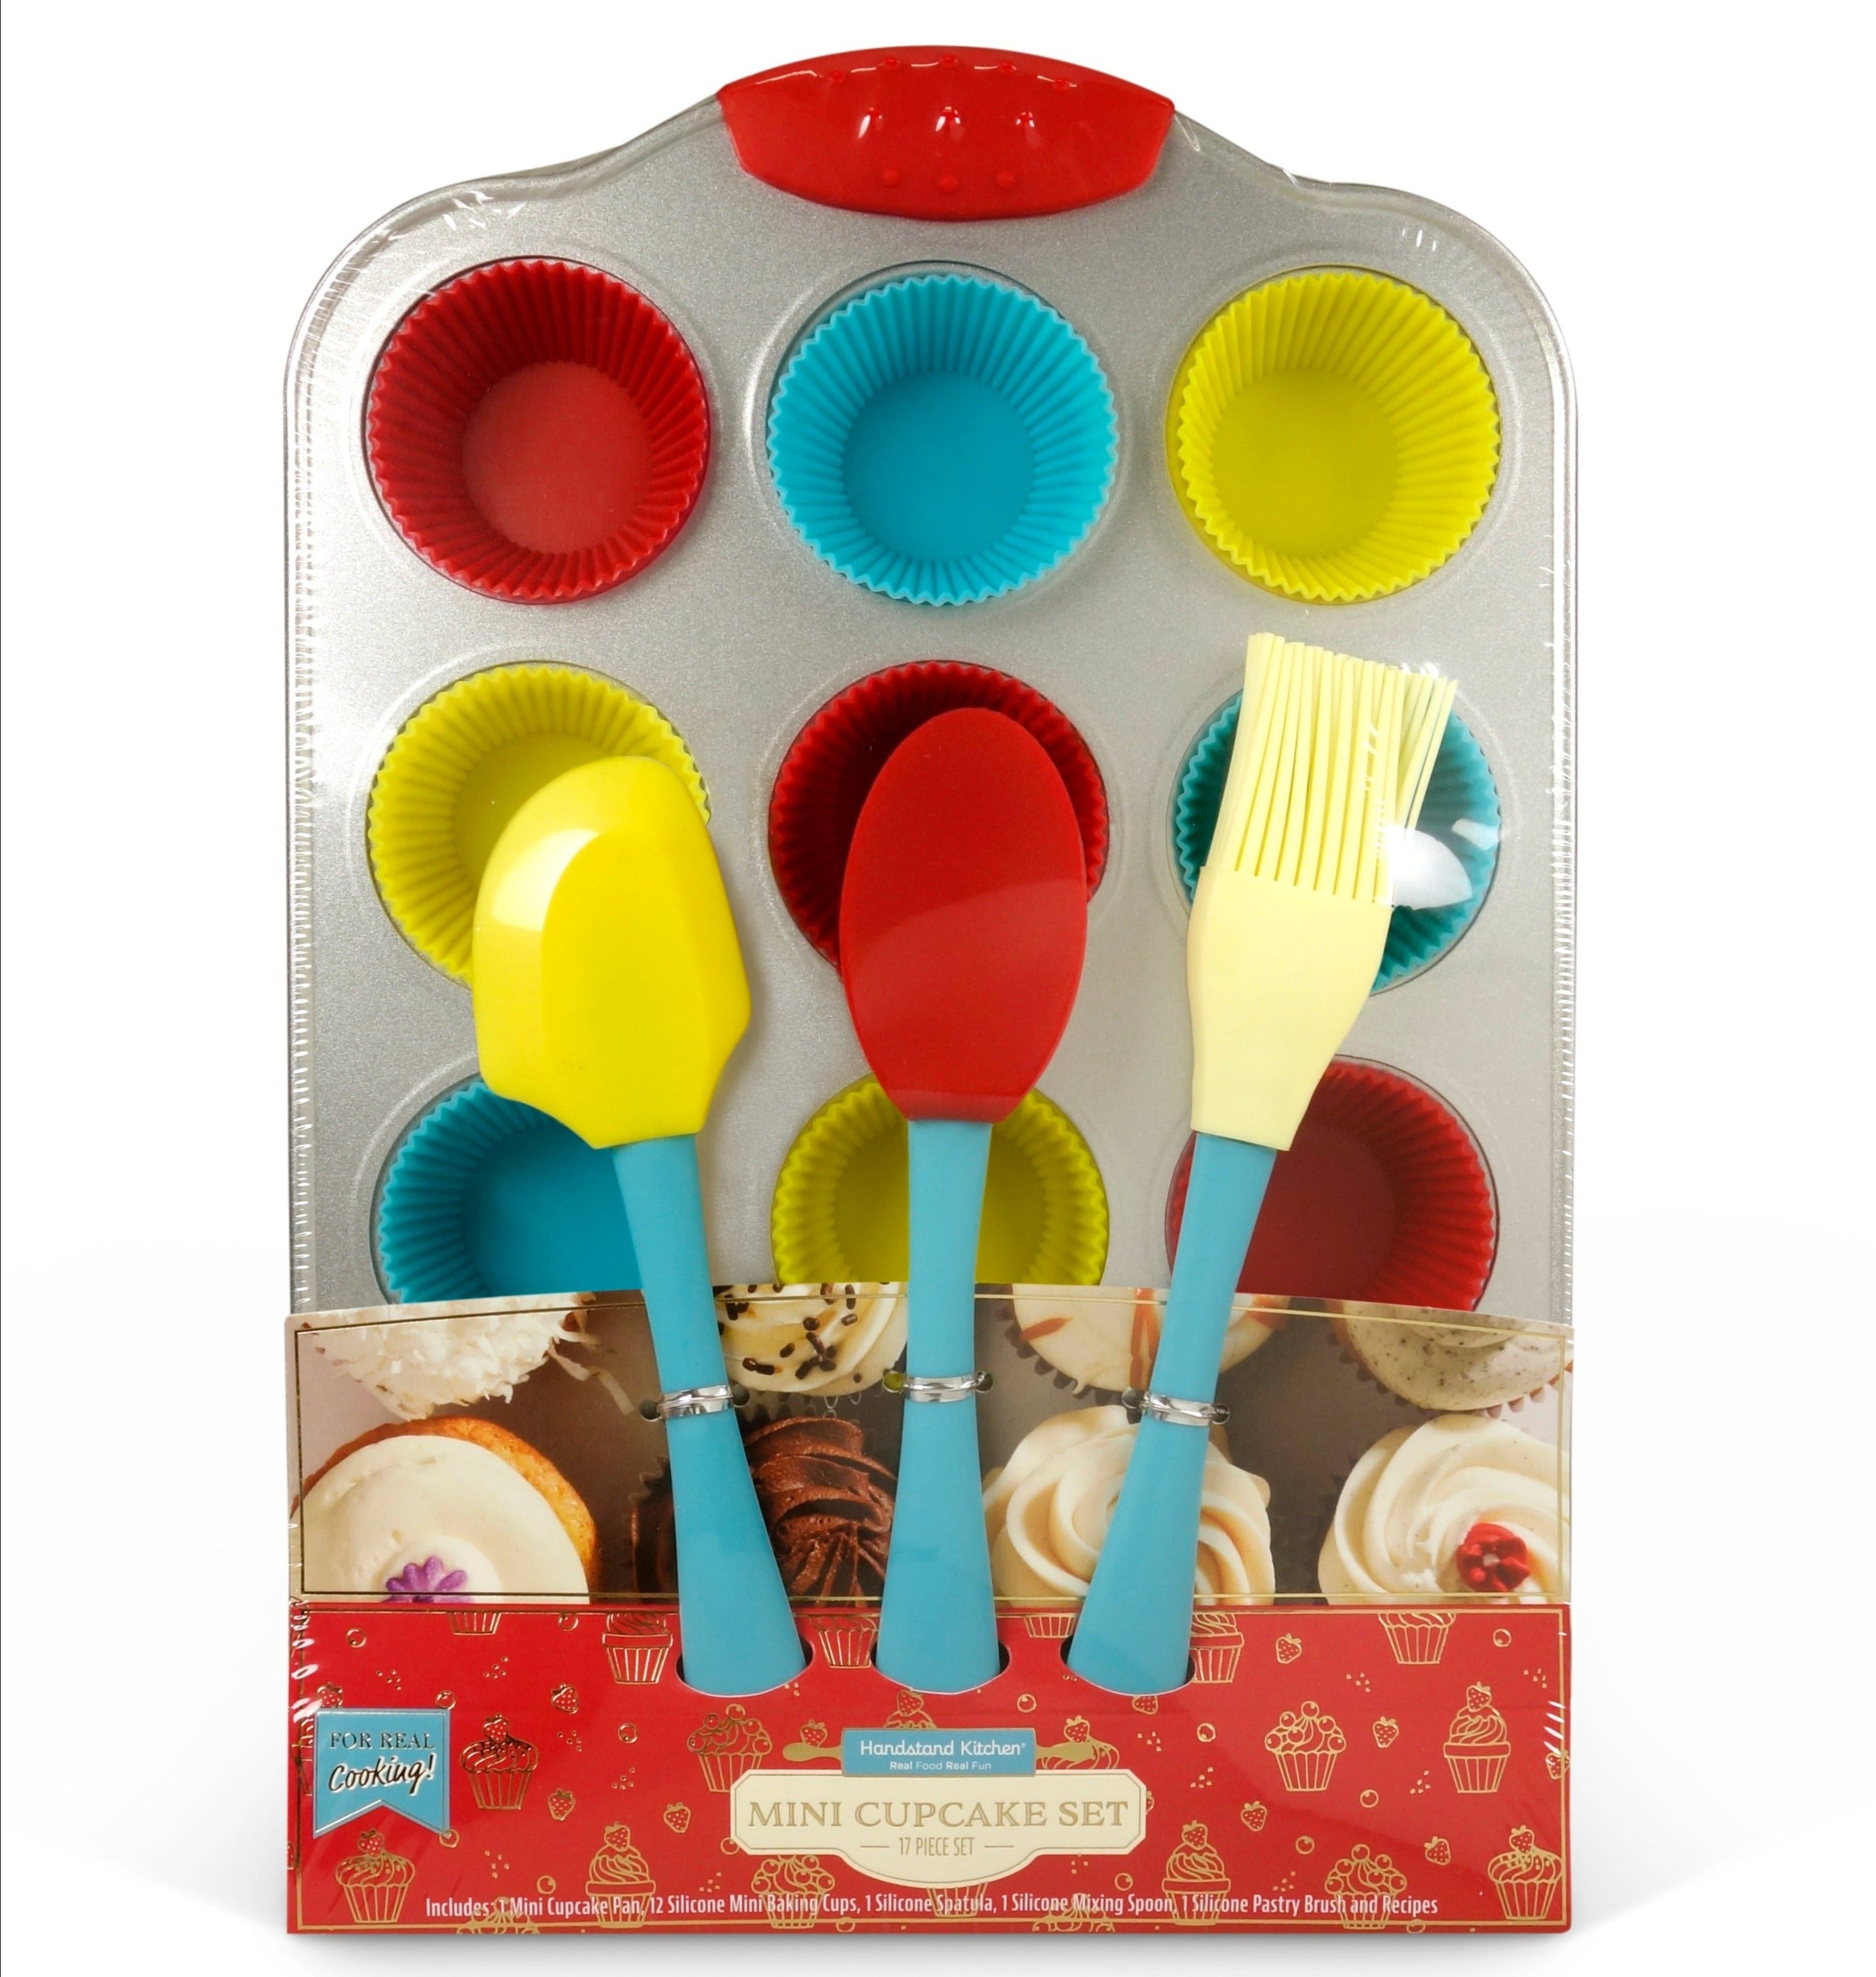 In box image of Mini Cupcake Set which Includes: 1 metal mini cupcake pan with 12 silicone baking cups, 1 silicone spatula, 1 silicone pastry brush, 1 silicone mixing spoon and recipes.